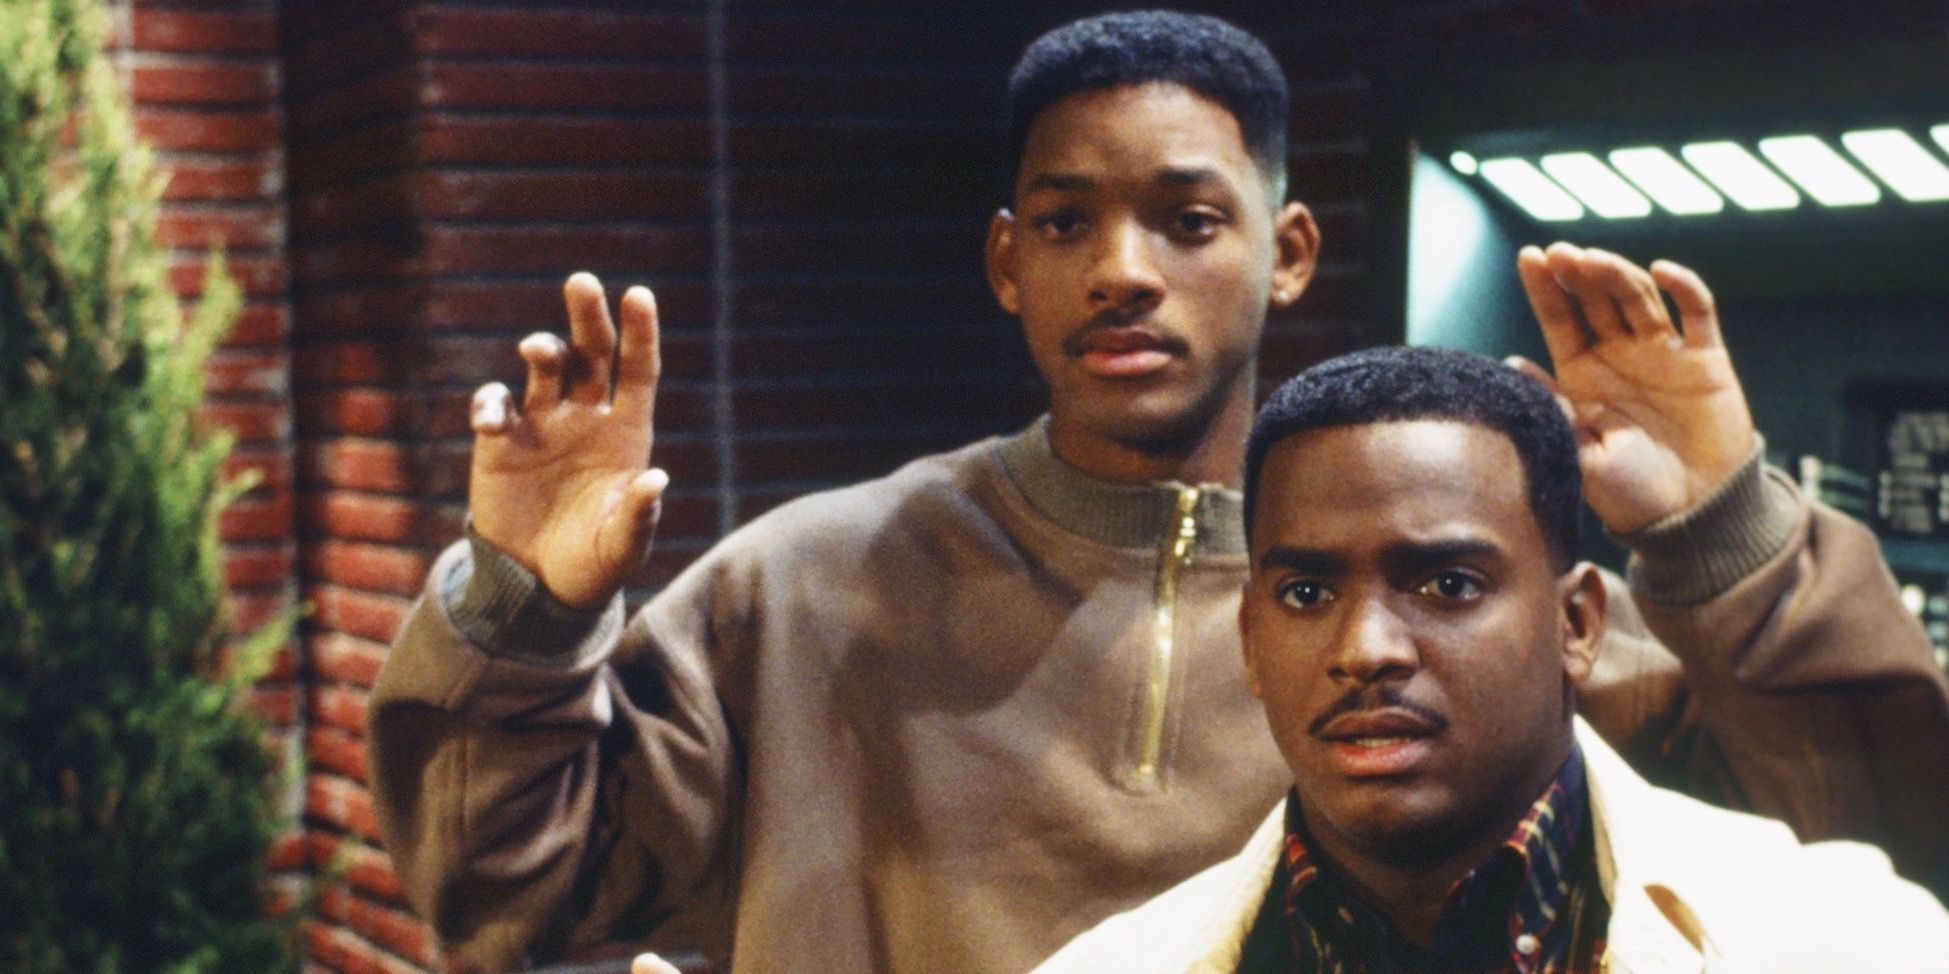 Will Smith and Alfonso Ribeiro in The Fresh Prince of Bel-Air